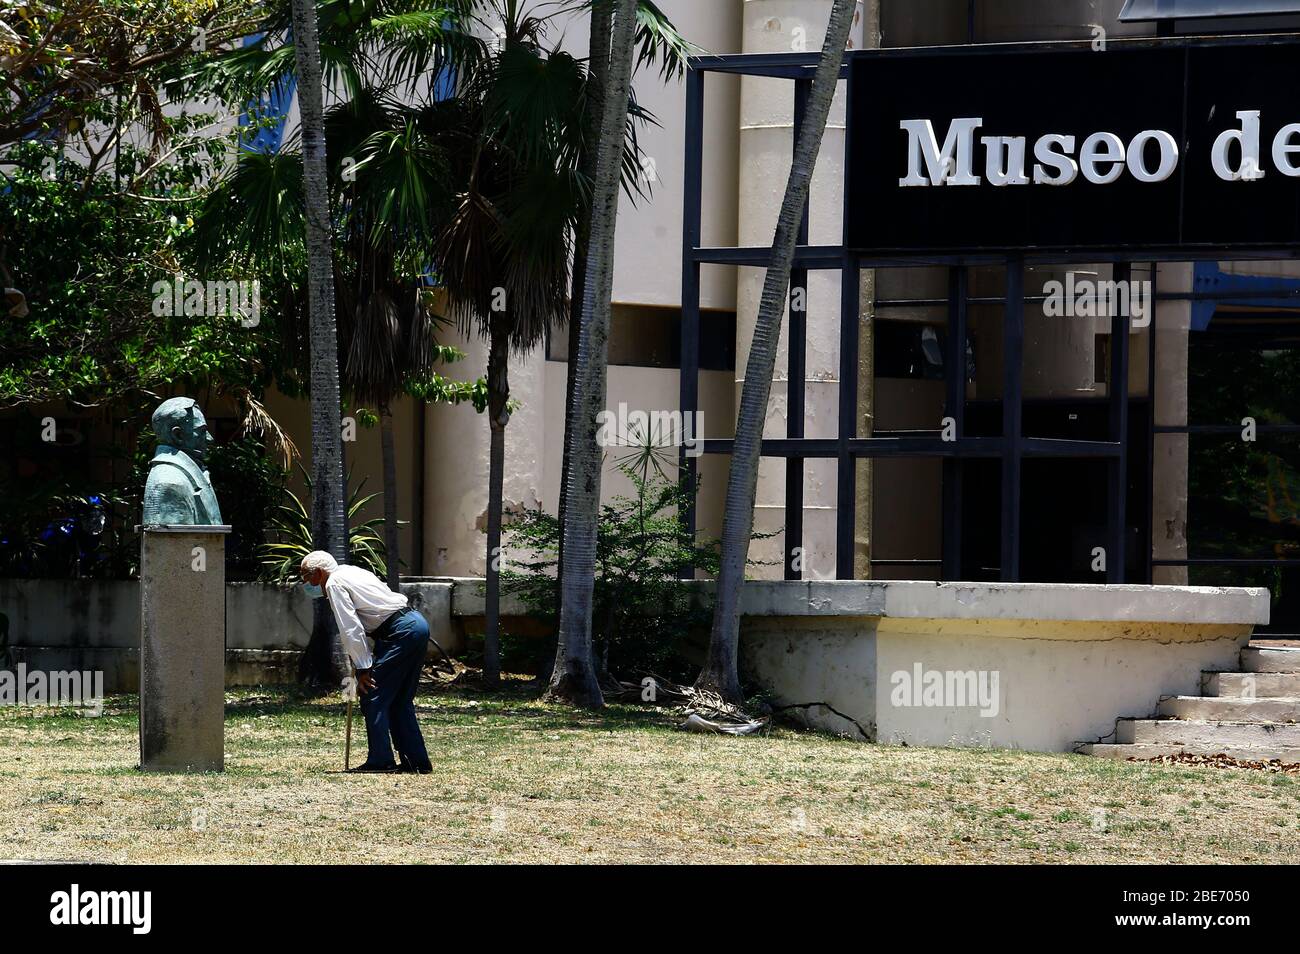 Valencia, Carabobo, Venezuela. 12th Apr, 2020. April 12, 2020. An old man, wearing his face mask, observes a statue in front of themuseum of Culture. The state alarm decreed by Nicolas Maudro that was extended for another month, as a preventive measure against the coronavirus.In the city of Valencia, Carabobo state. Photo: Juan Carlos Hernandez Credit: Juan Carlos Hernandez/ZUMA Wire/Alamy Live News Stock Photo